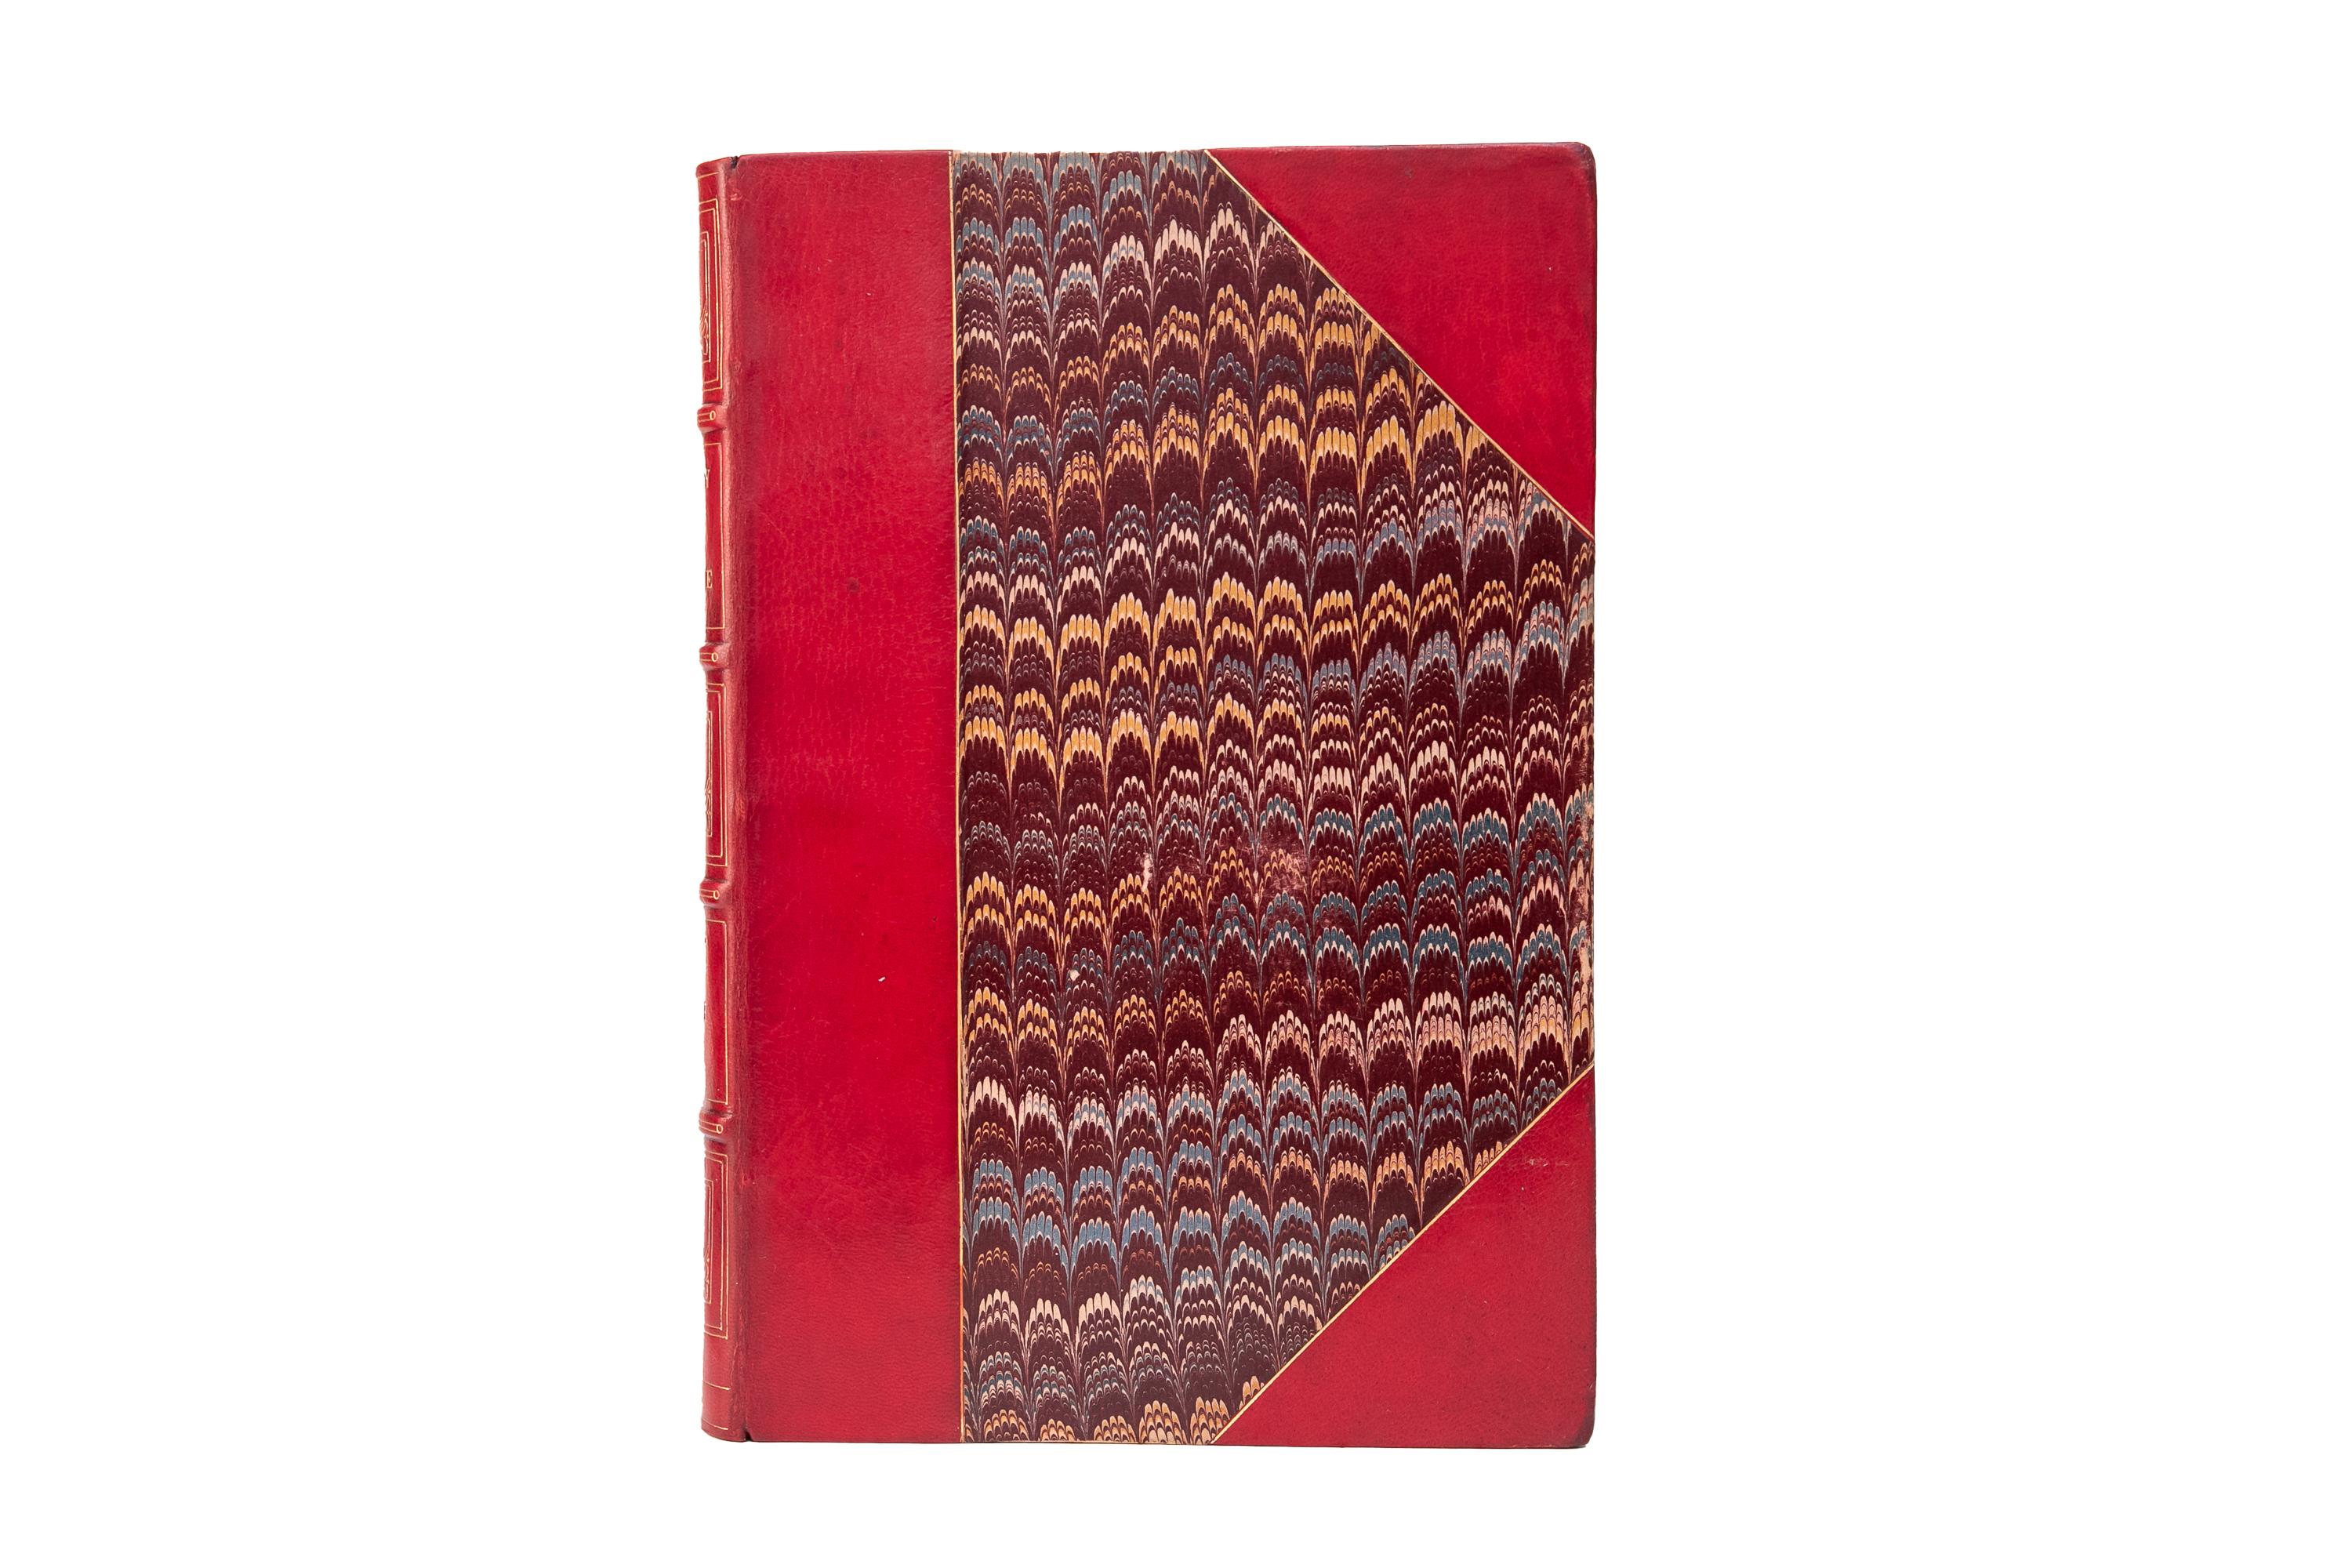 8 Volumes. Victor Duruy, History of Greece. Bound in 3/4 red morocco and marbled boards, bordered in gilt-tooling. The raised band spines are decorated in gilt-tooling. The top edges are gilt with marbled endpapers. Translated and edited by M.M.